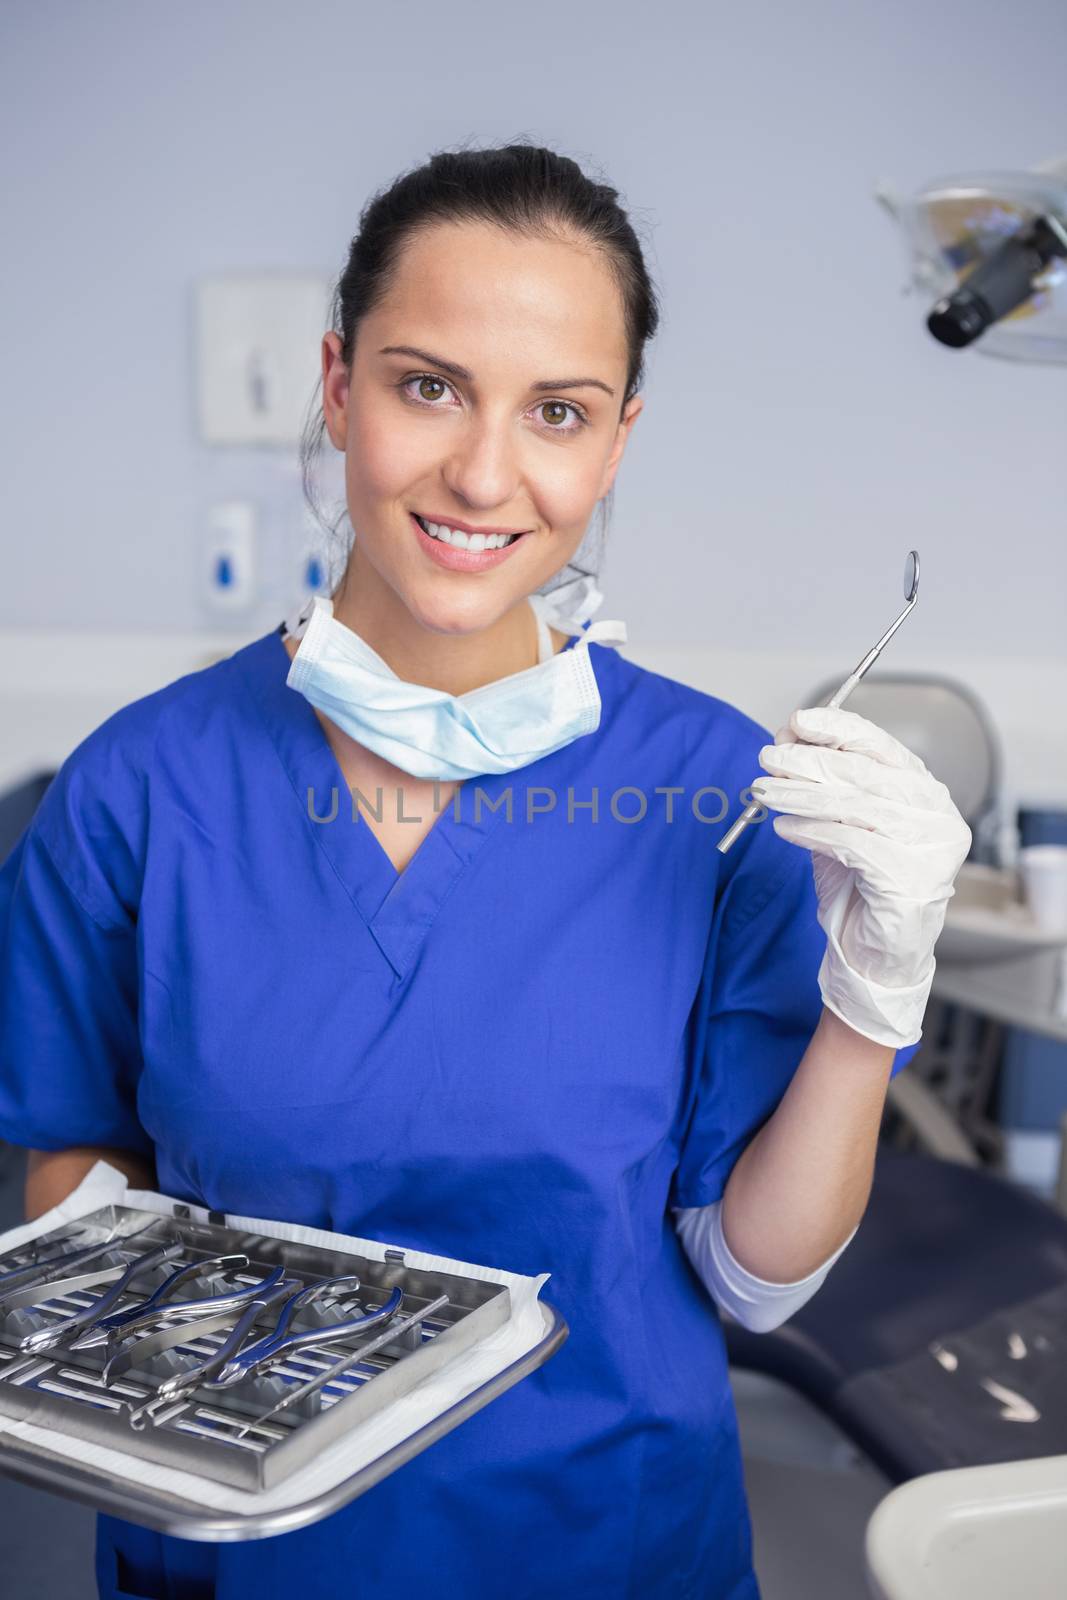 Smiling dentist holding tray and angle mirror  by Wavebreakmedia